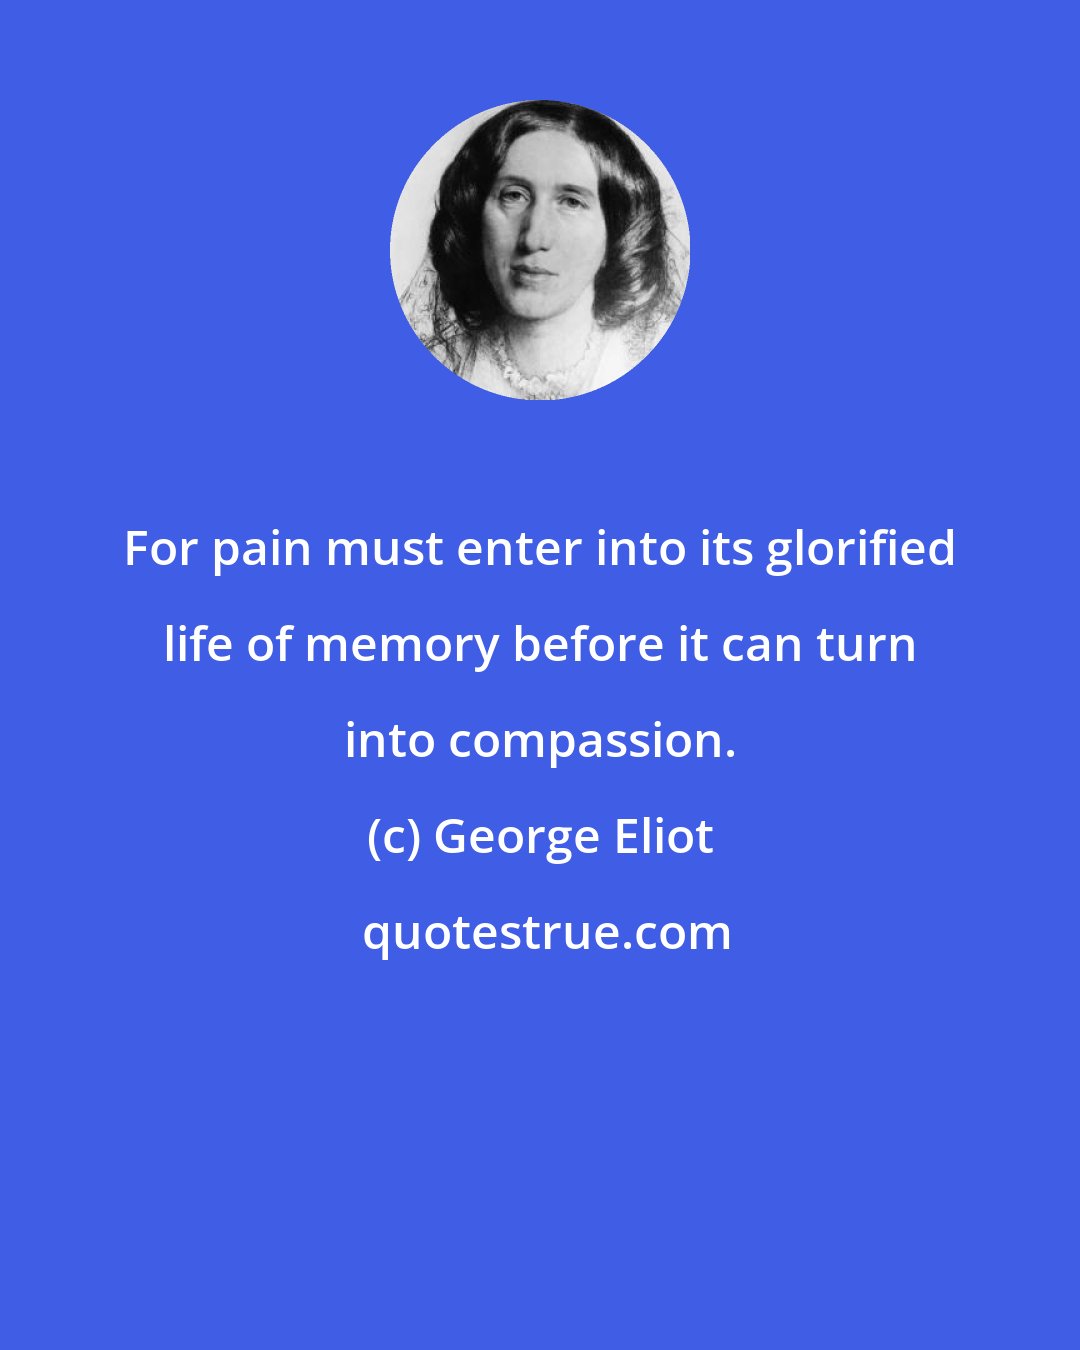 George Eliot: For pain must enter into its glorified life of memory before it can turn into compassion.